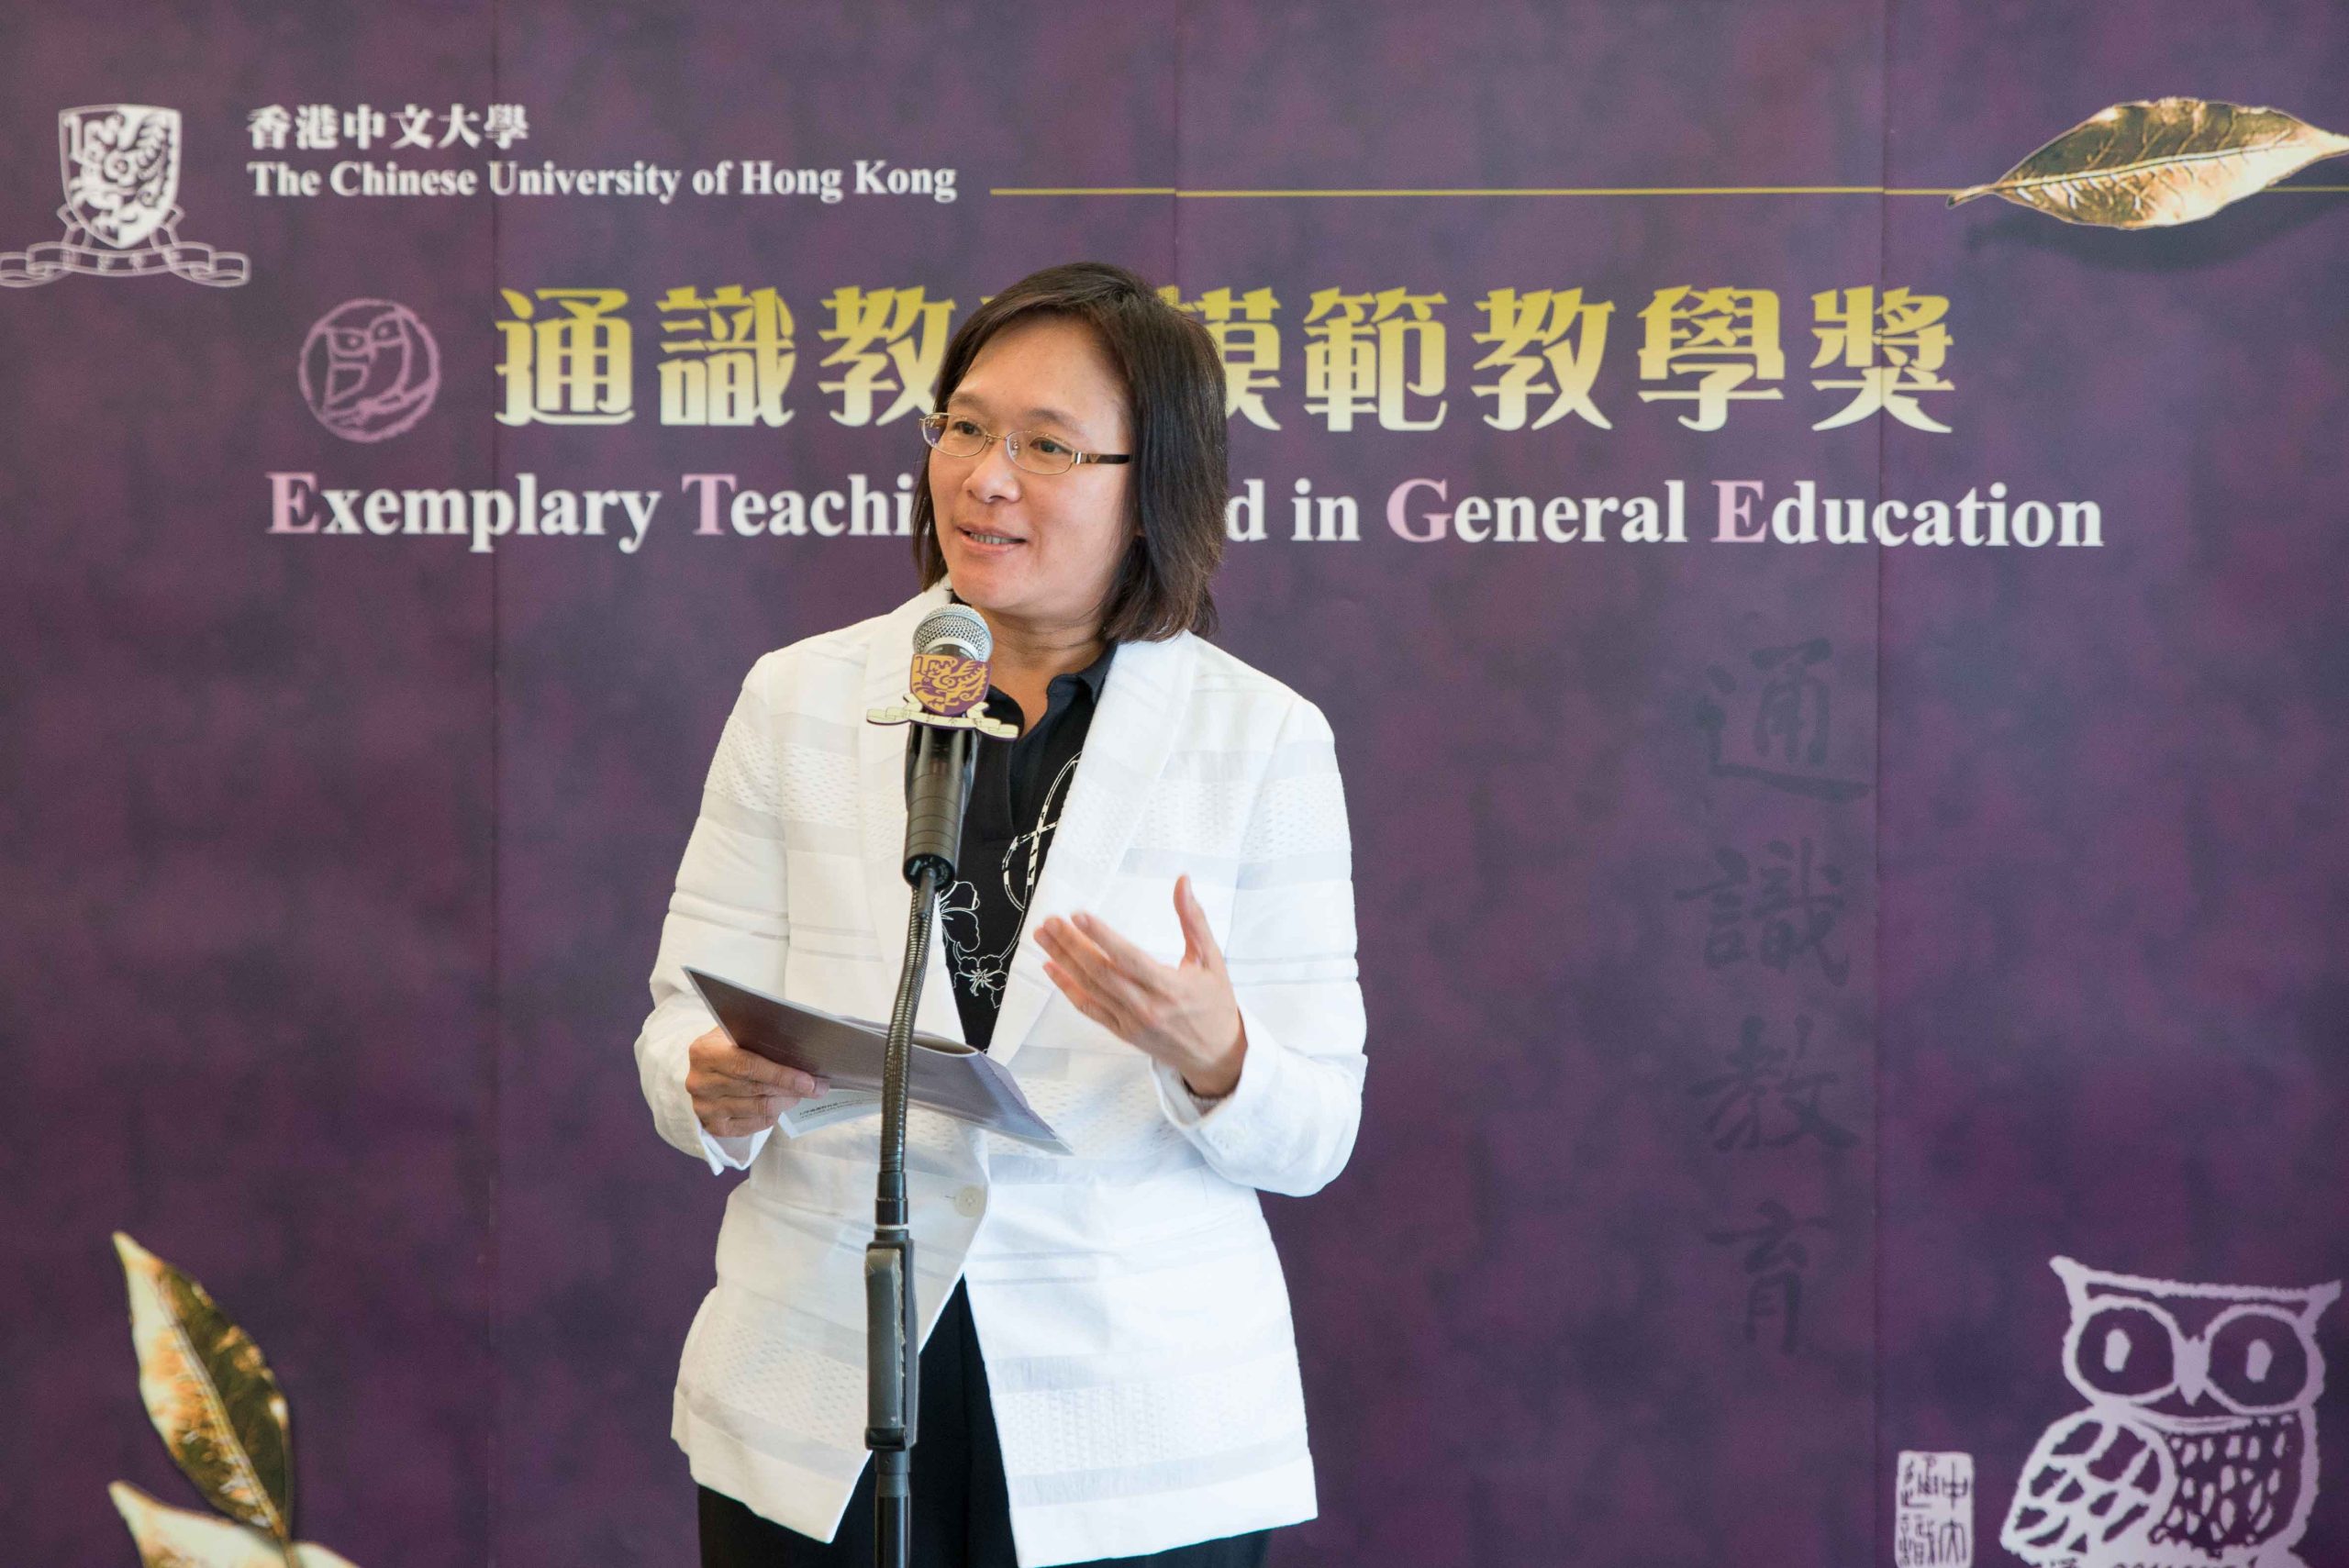 Address by Professor Poon Wai Yin, Chairperson of the Senate Committee on General Education